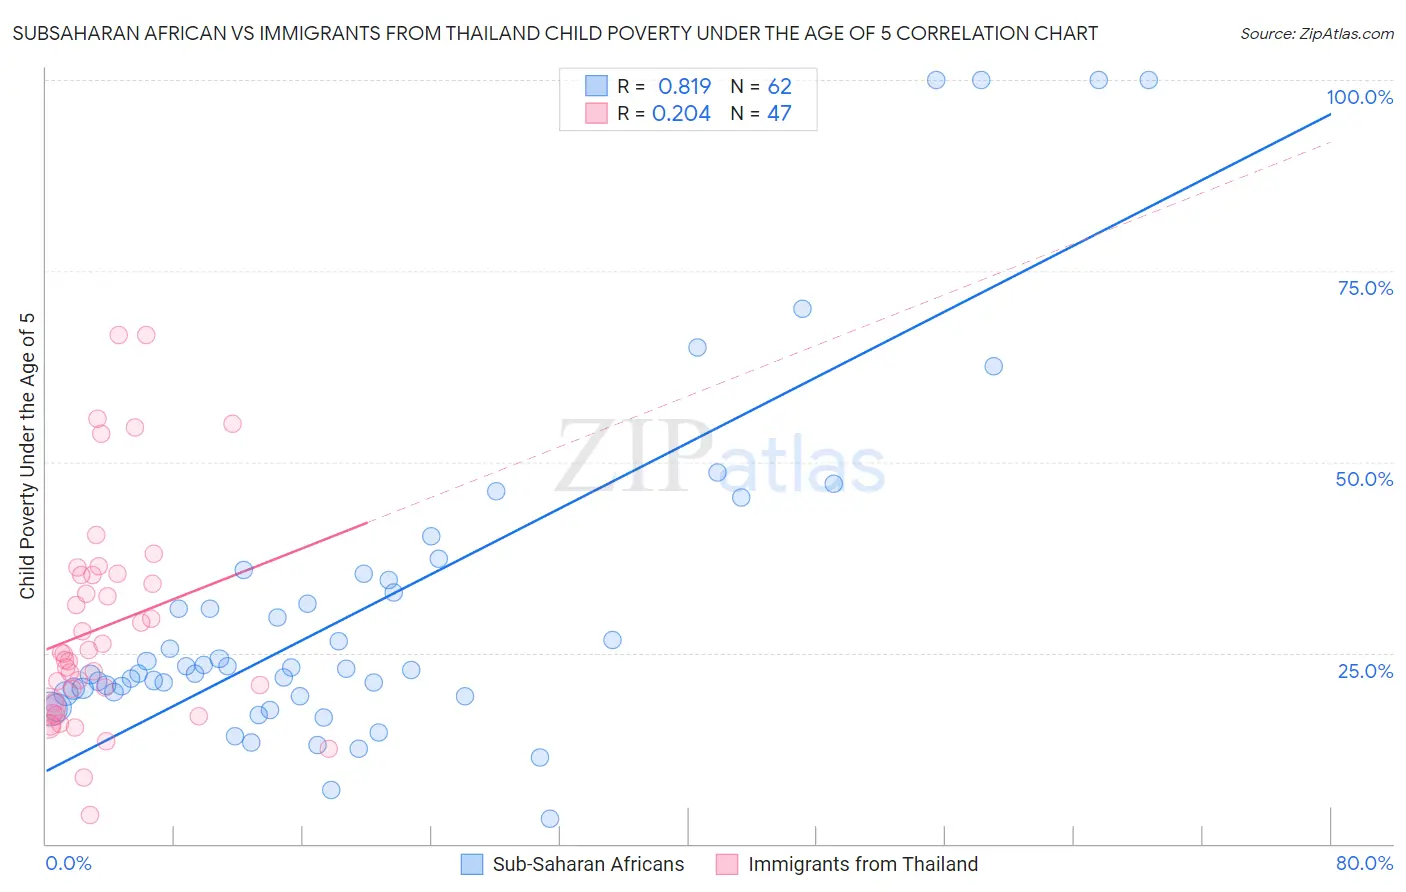 Subsaharan African vs Immigrants from Thailand Child Poverty Under the Age of 5